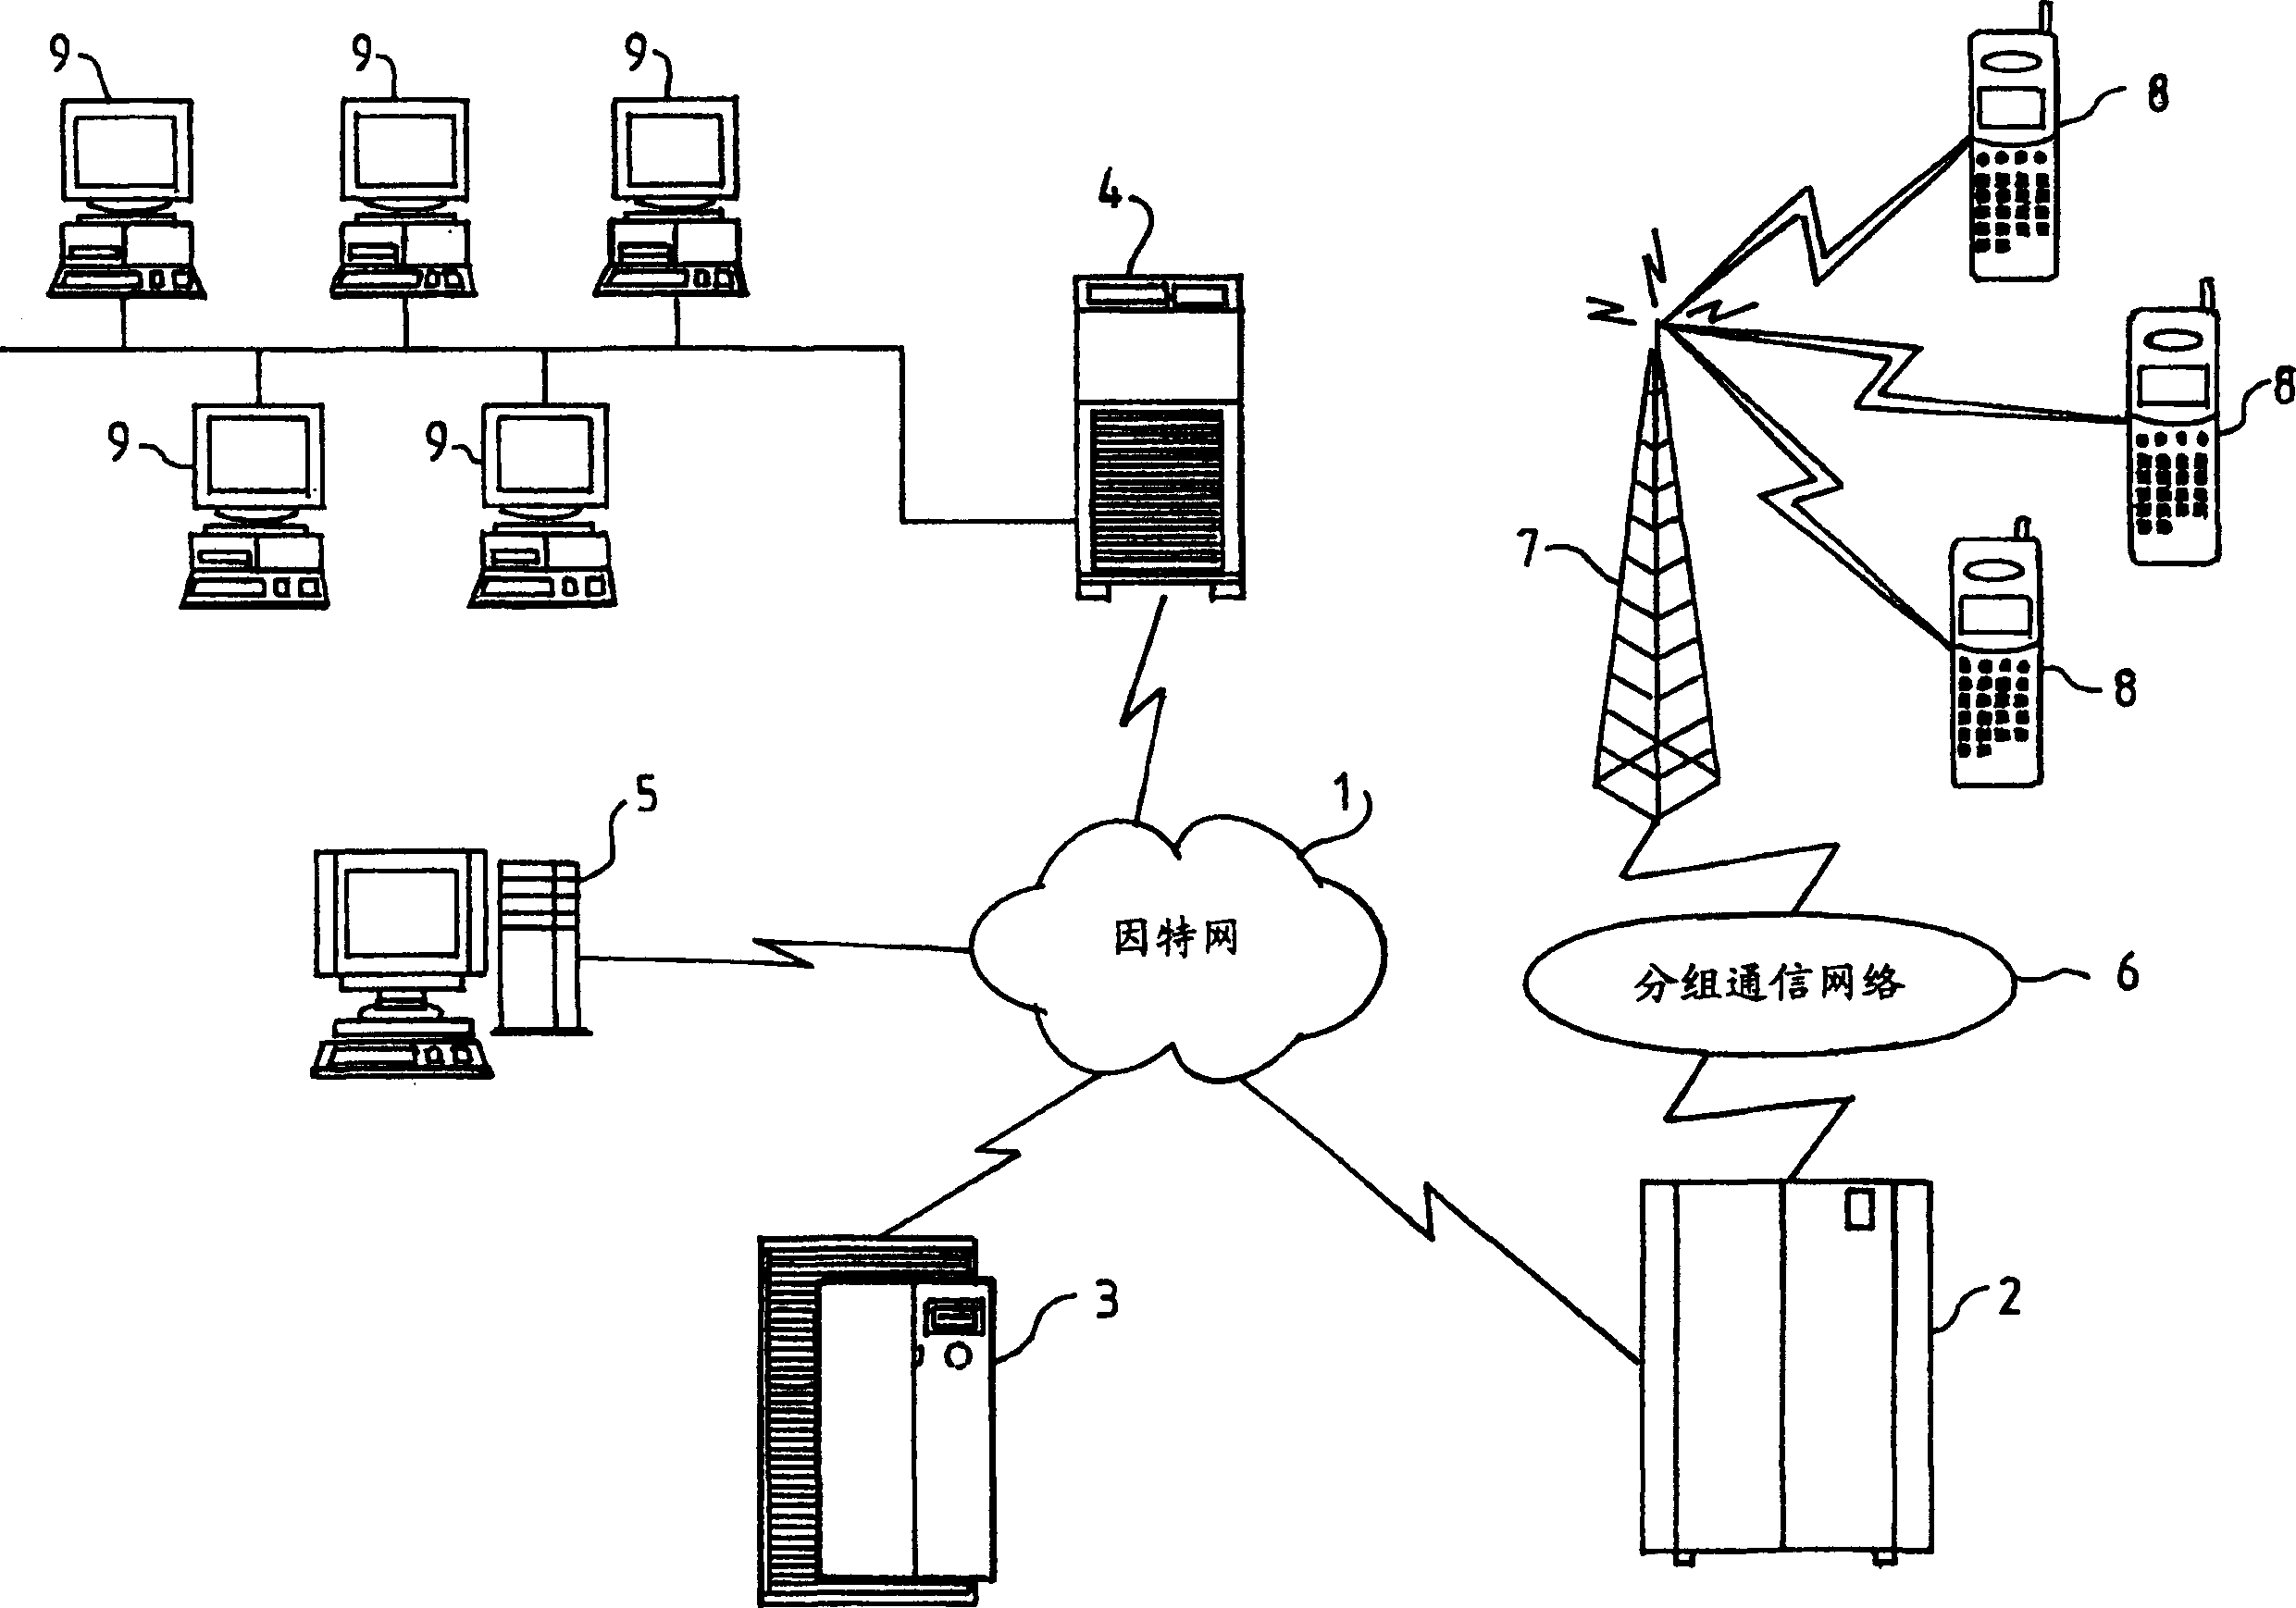 System communication between computer systems